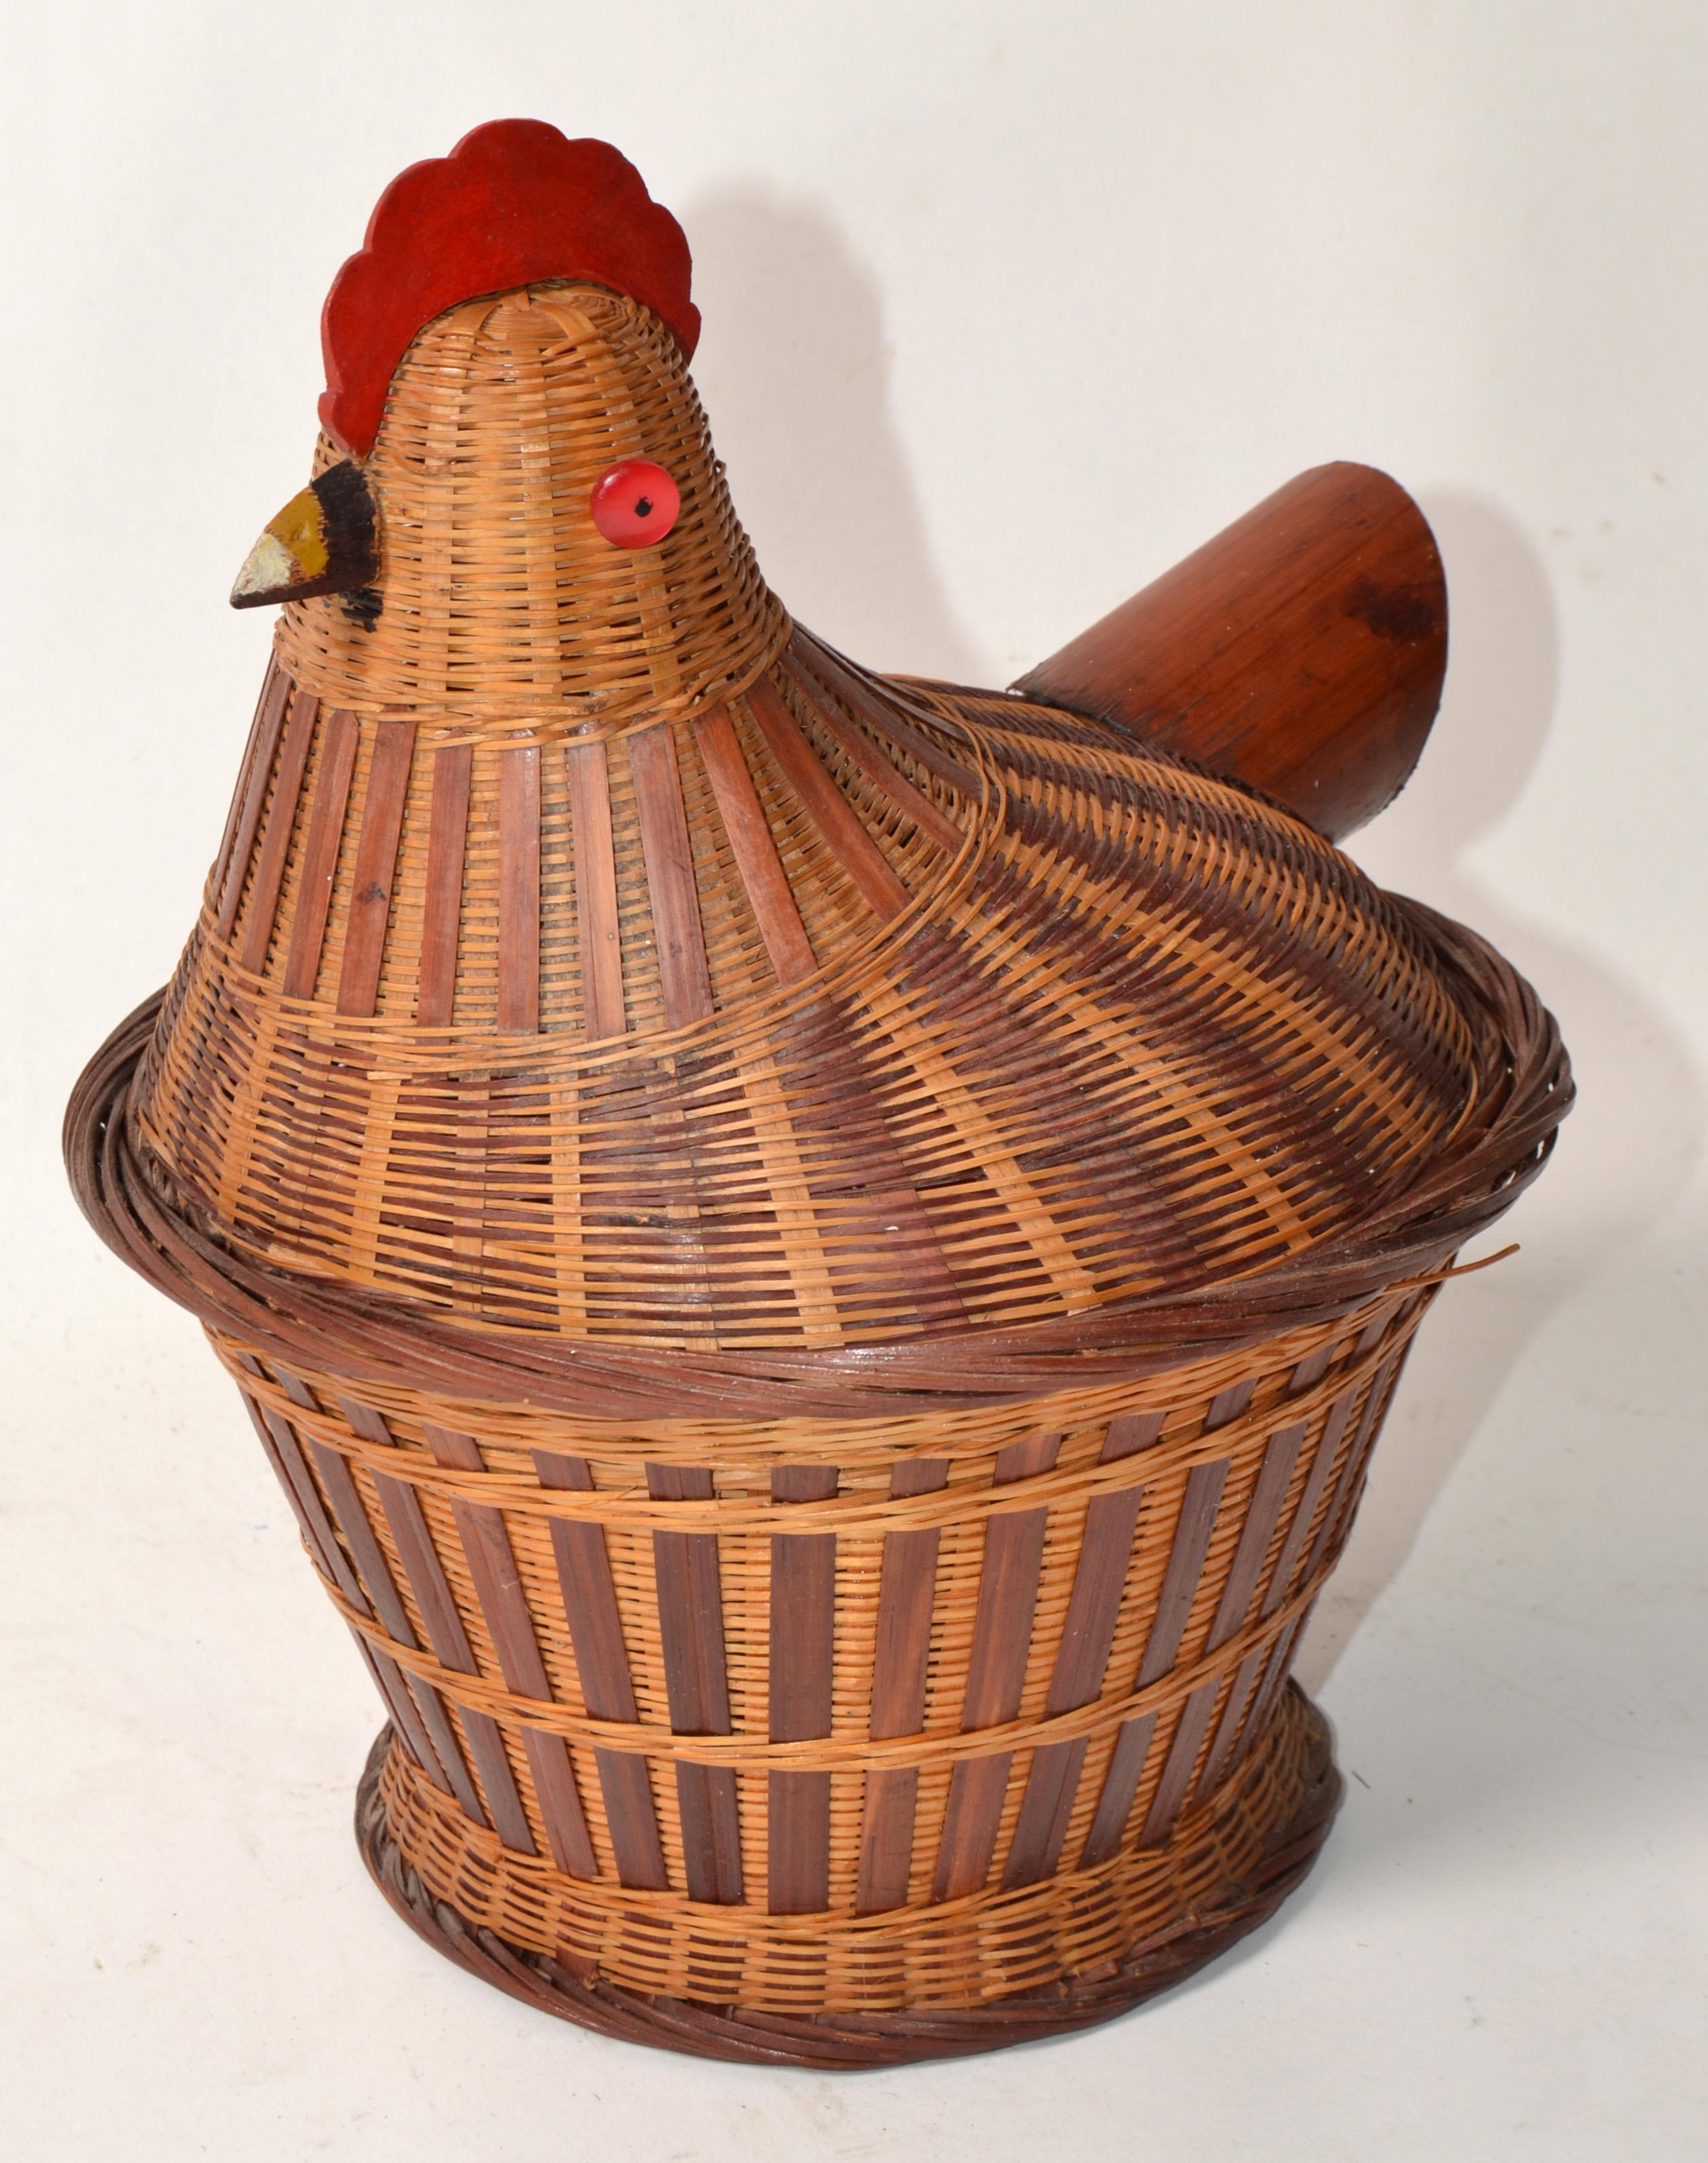 Collectible 1960s kitchen decoration figural Wicker hand-woven lidded Basket. Hen Sitting on nest. Hen is the lid with attached red wood comb and beak and Red Button Eyes the tail is bamboo. The basket itself has a double layer so that the hen has a